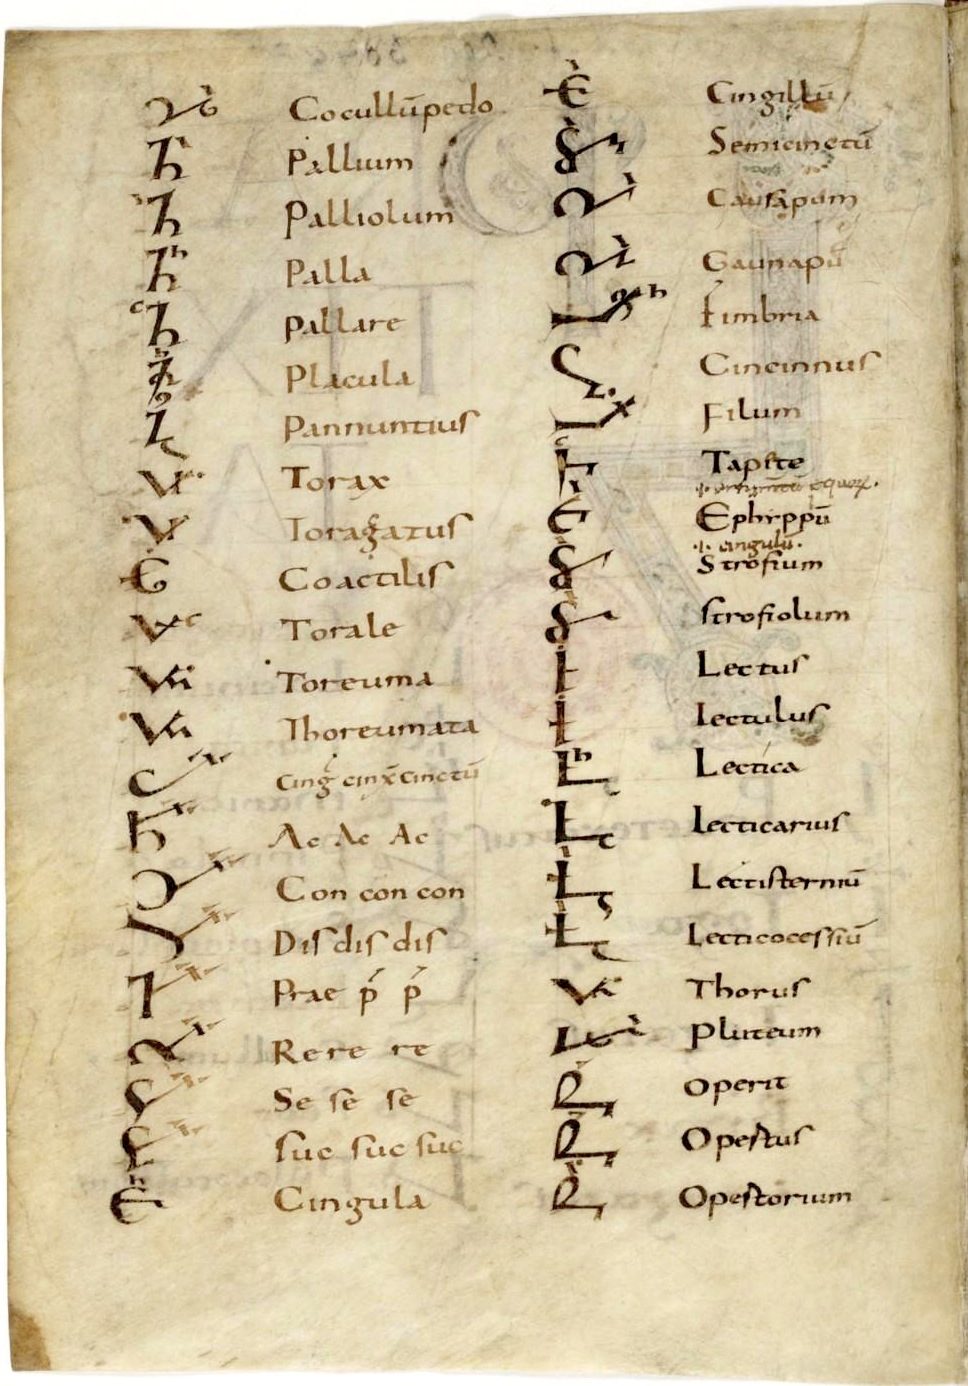 First page of the Commentarii notarum tironianarum (AD 800-850), detailing on two columns the tironian notes (left) and their meaning (right).